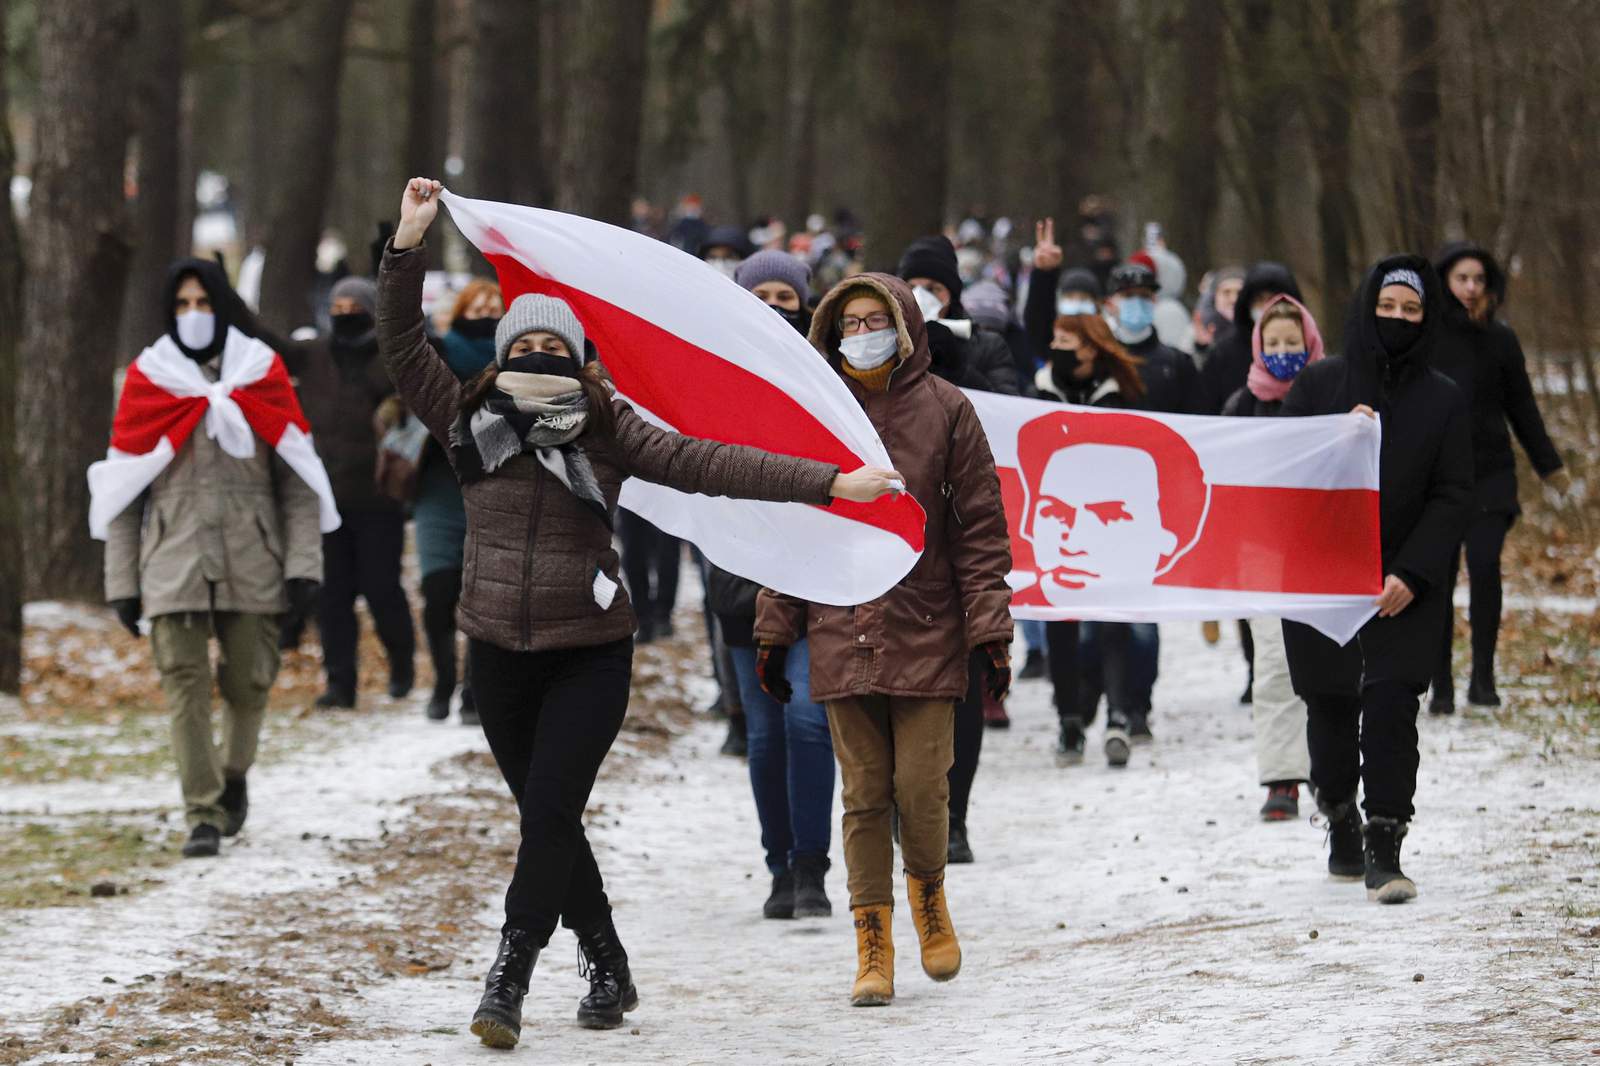 Protesters in Belarus keep pushing for leader's resignation